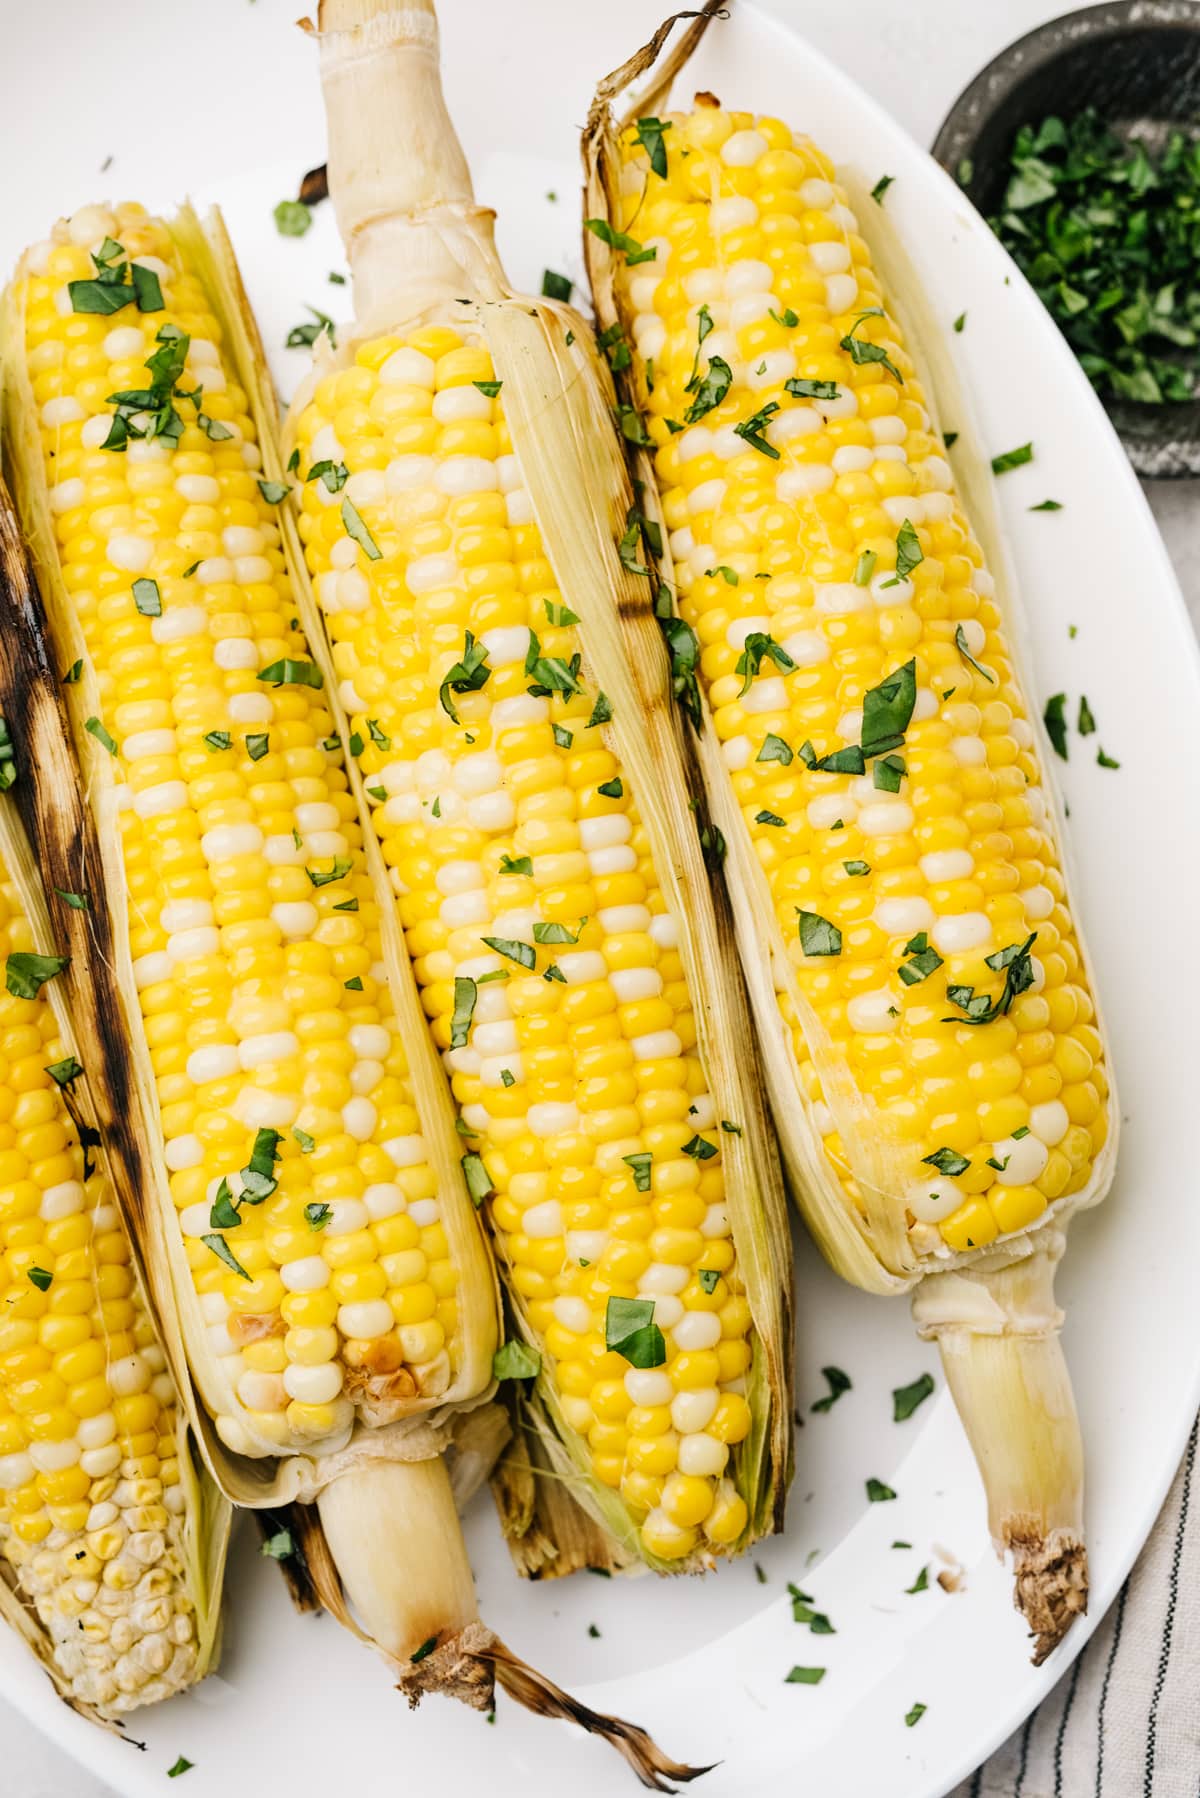 Four ears of grilled corn on a white platter, garnished with salt and chopped basil.